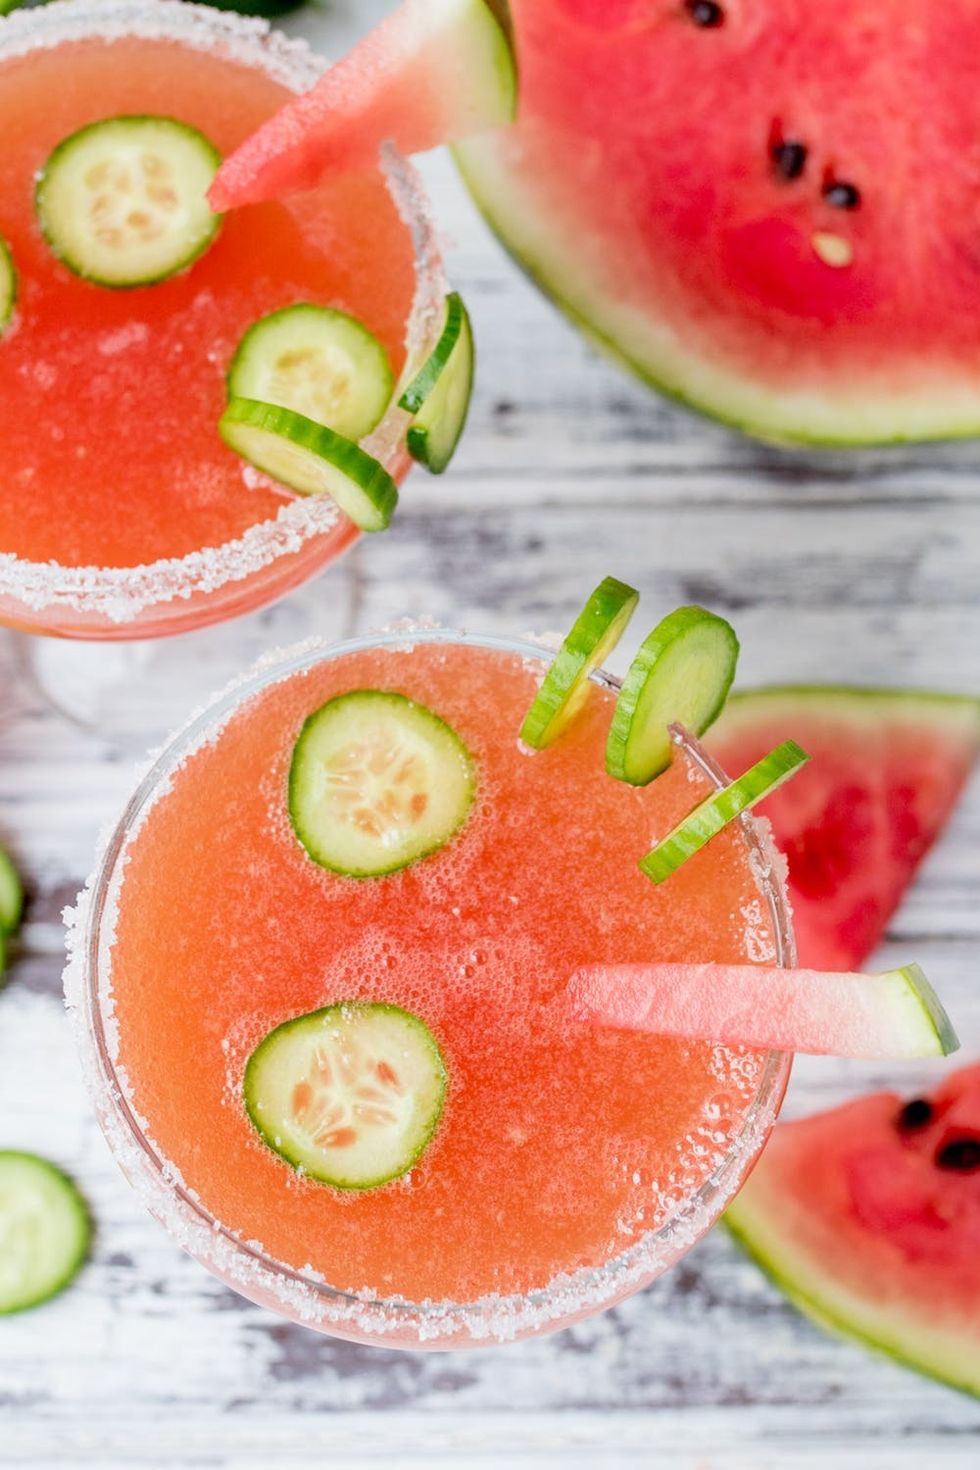 Celebrate Mother's Day With Our Watermelon Mom-Osa Recipe!